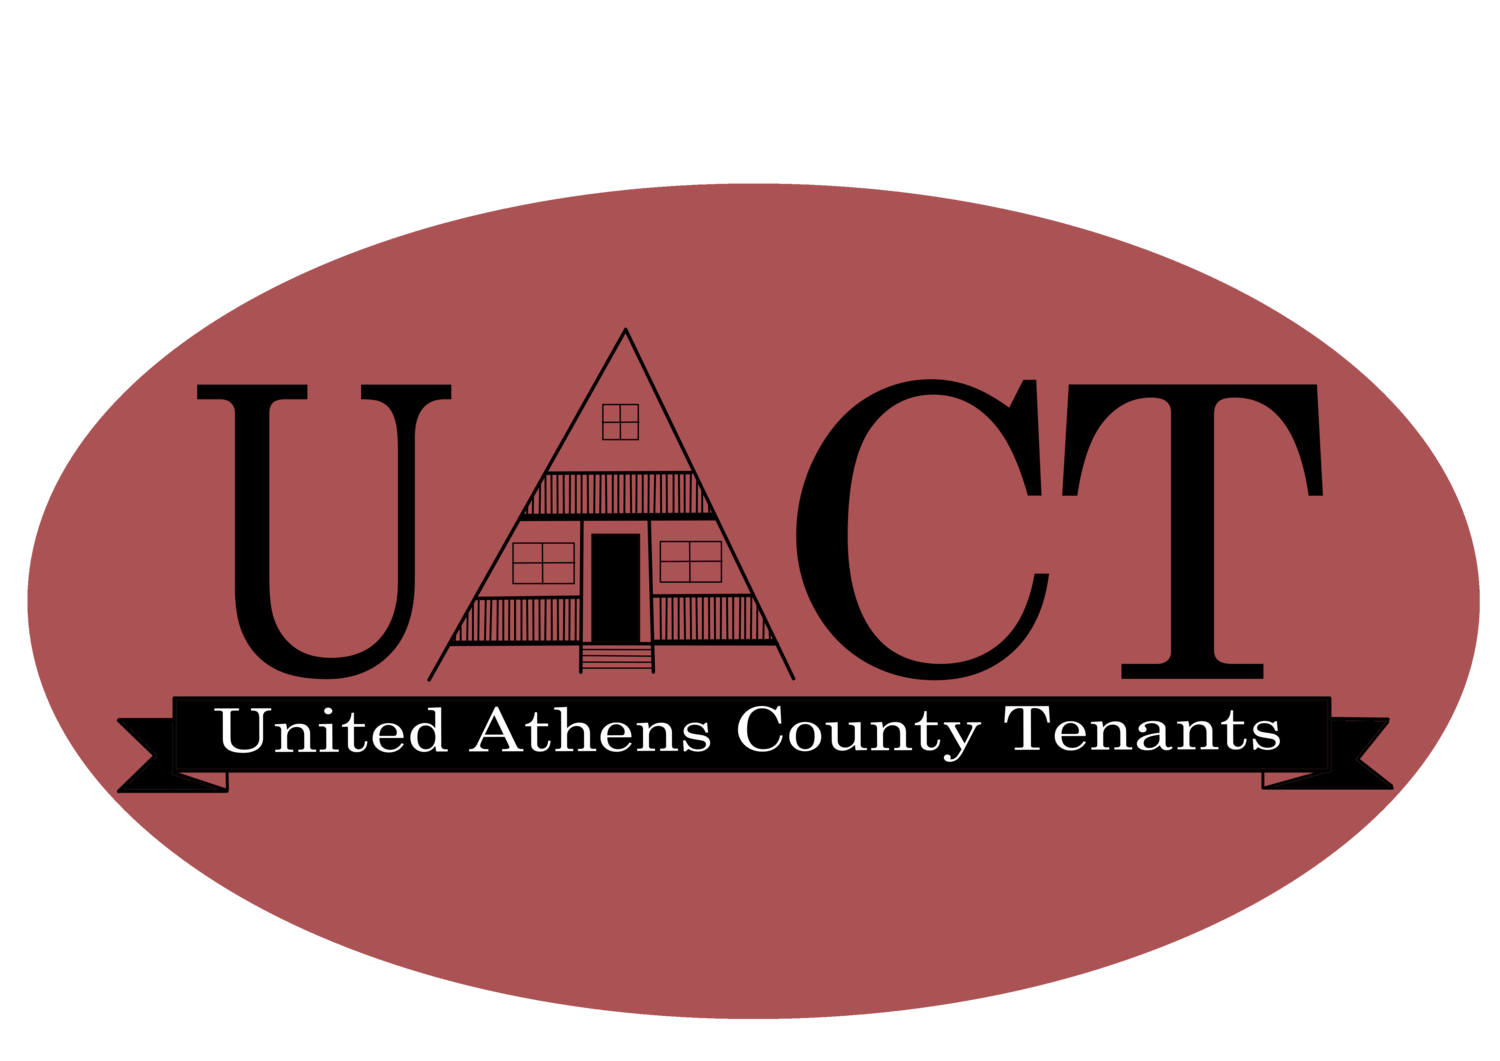 United Athens County Tenants